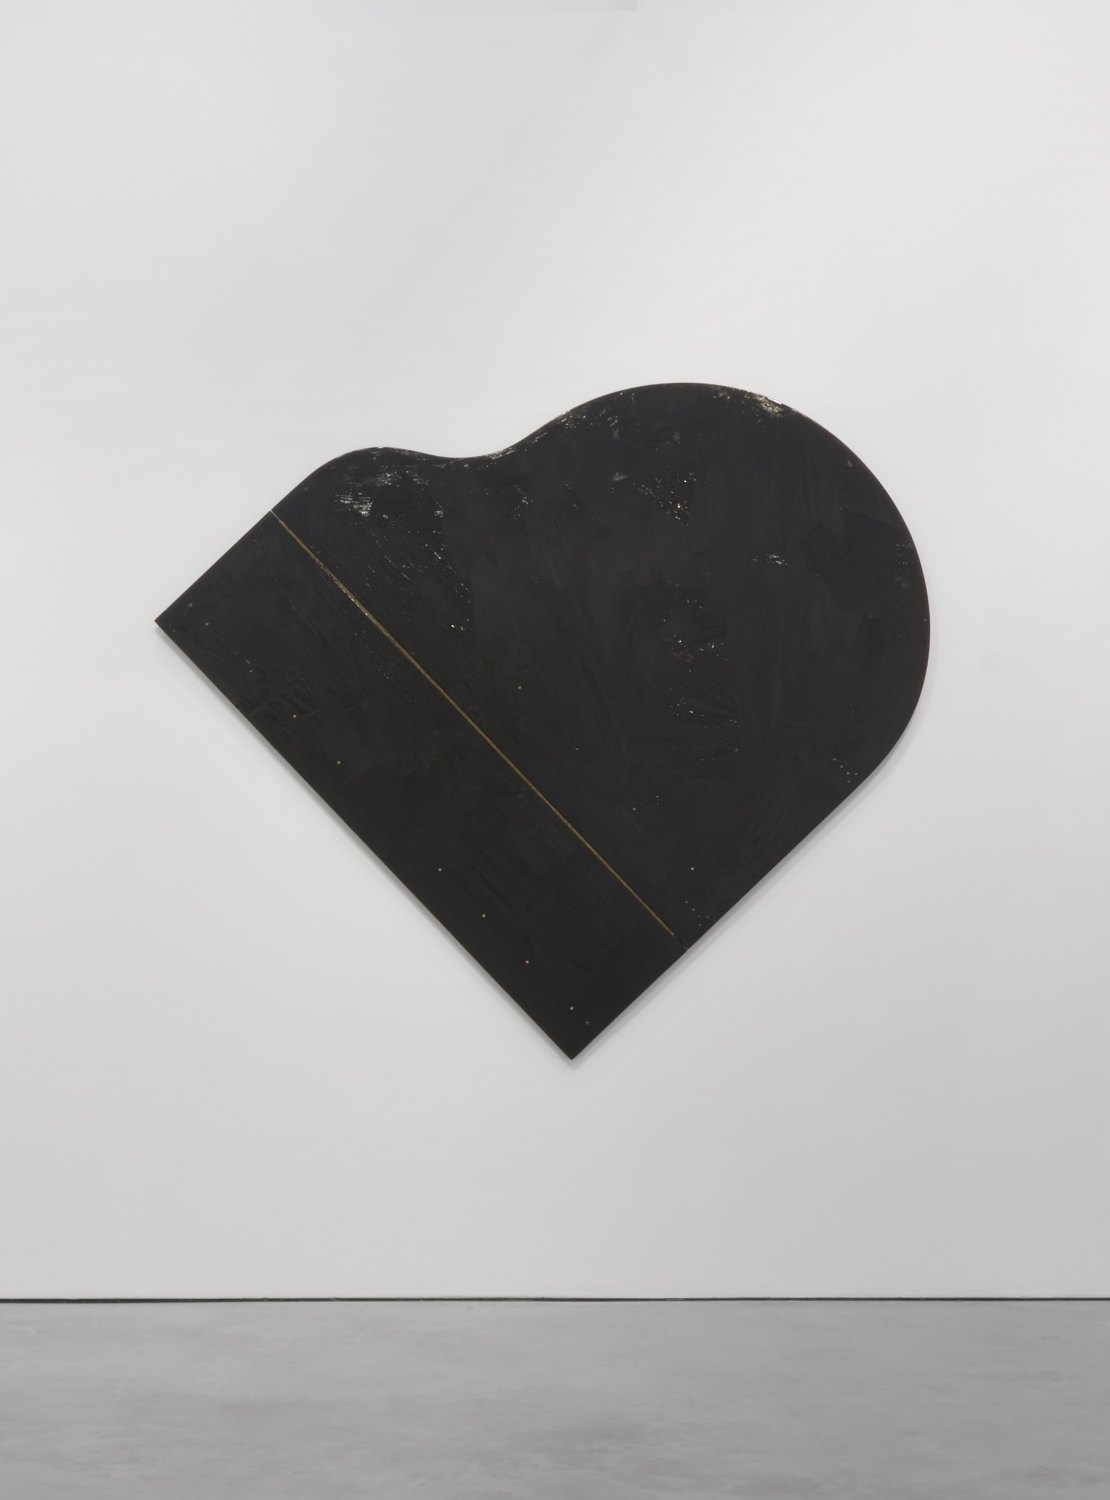 SoiL Thornton Whose Authorship In Living Denied Expression, 2019 non drying anti-climb paint on baby grand piano lid 170 x 195 x 2 cm